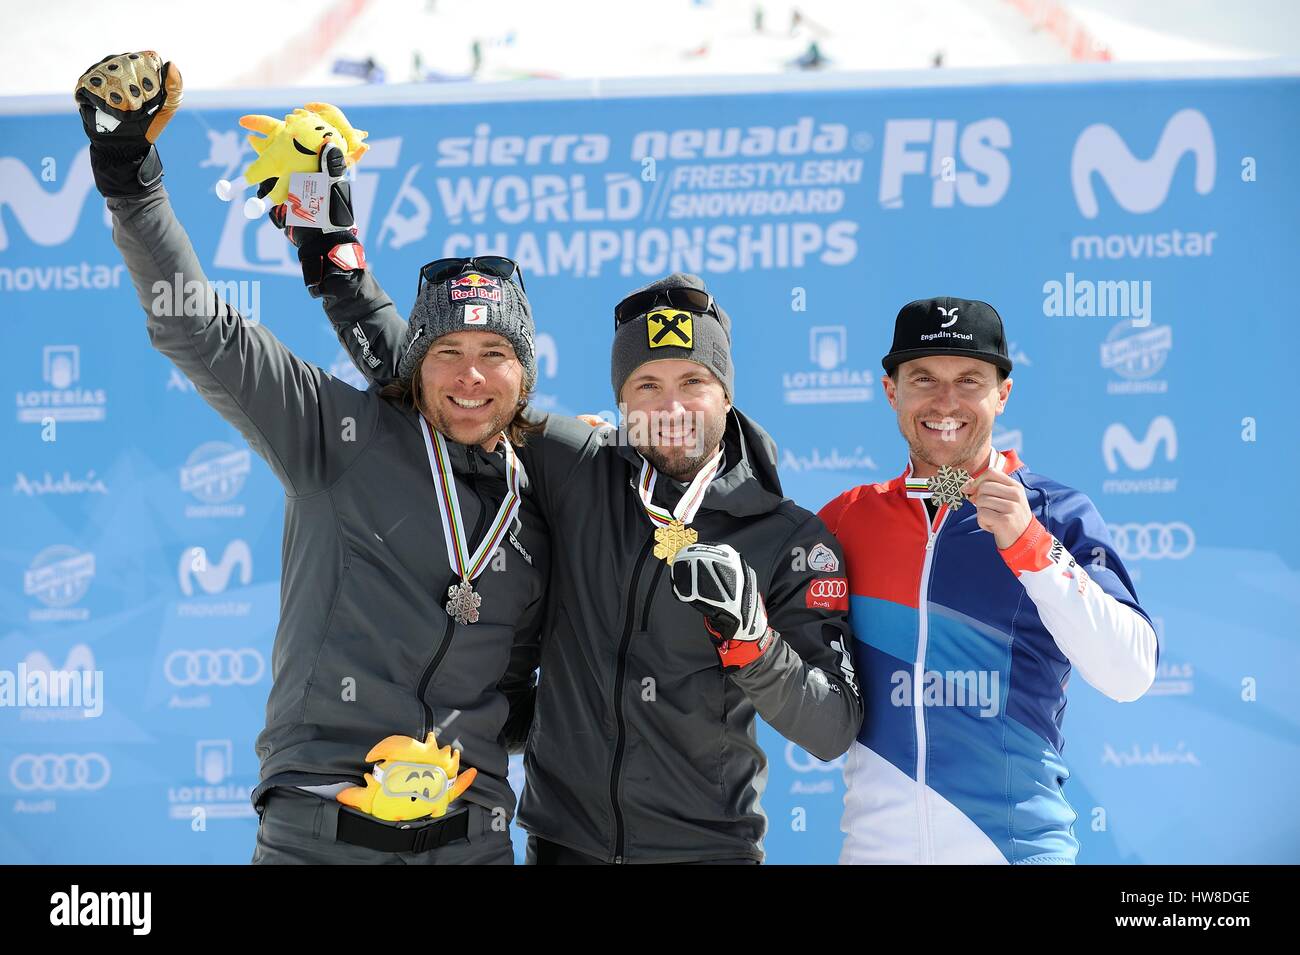 Sierra Nevada, Spain. 16th Mar, 2017. (L-R) Benjamin Karl, Andreas Prommegger (AUT), Nevin Galmarini (SUI) Snowboarding : Gold medalist Andreas Prommegger of Austria, silver medalist Benjamin Karl of Austria and bronze medalist Nevin Galmarini of Switzerland pose with their medals during the medal ceremony for the 2017 FIS Snowboard World Championships Men's Parallel Giant Slalom in Sierra Nevada, Spain . Credit: Hiroyuki Sato/AFLO/Alamy Live News Stock Photo